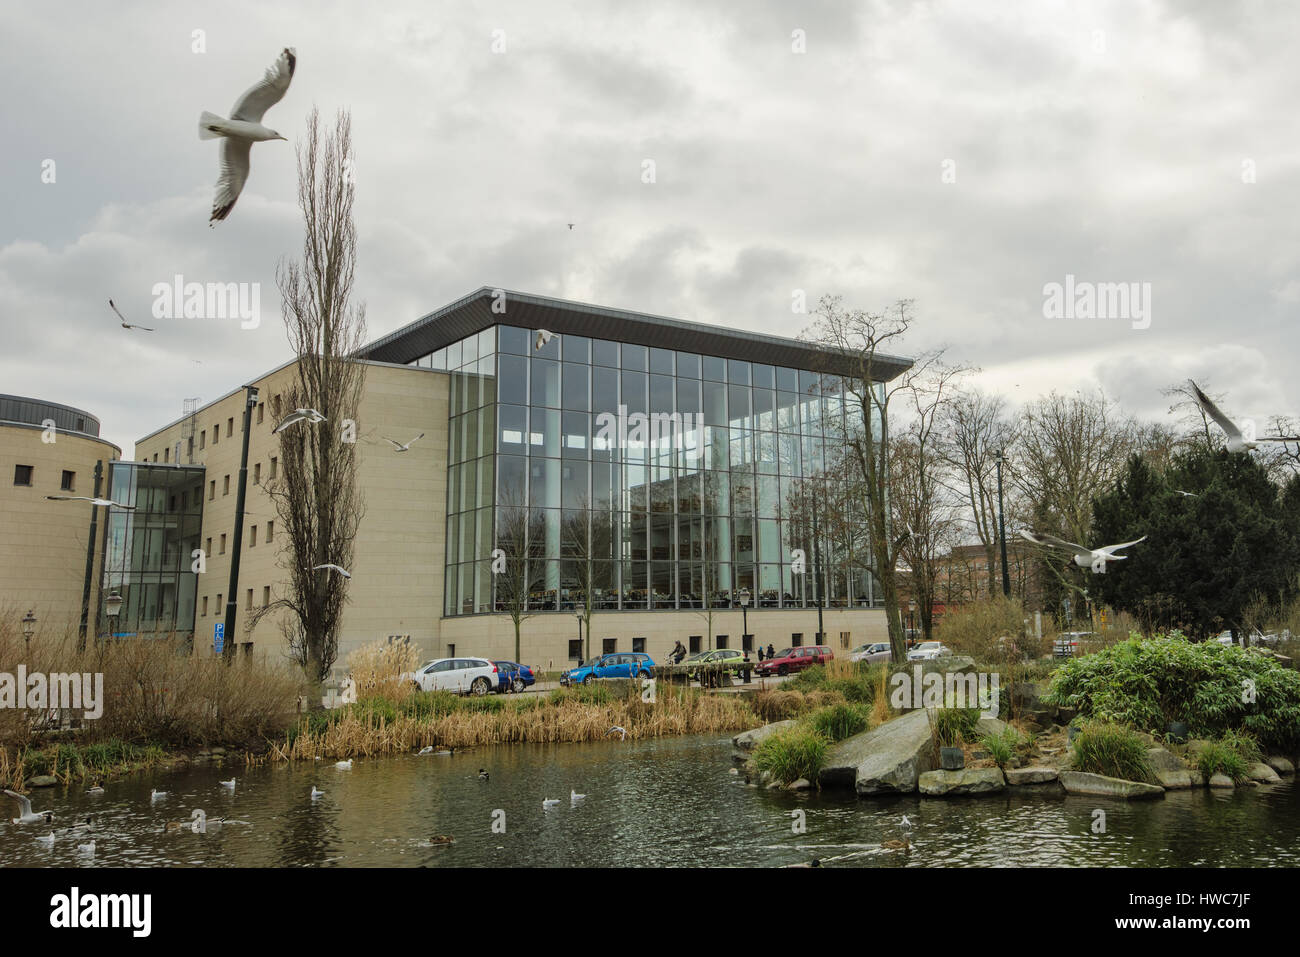 MALMO, SWEDEN - MARCH 12, 2017: Malmo City Library is a municipal public library opened in 1905. 'The Calendar of light', new part of the library, des Stock Photo